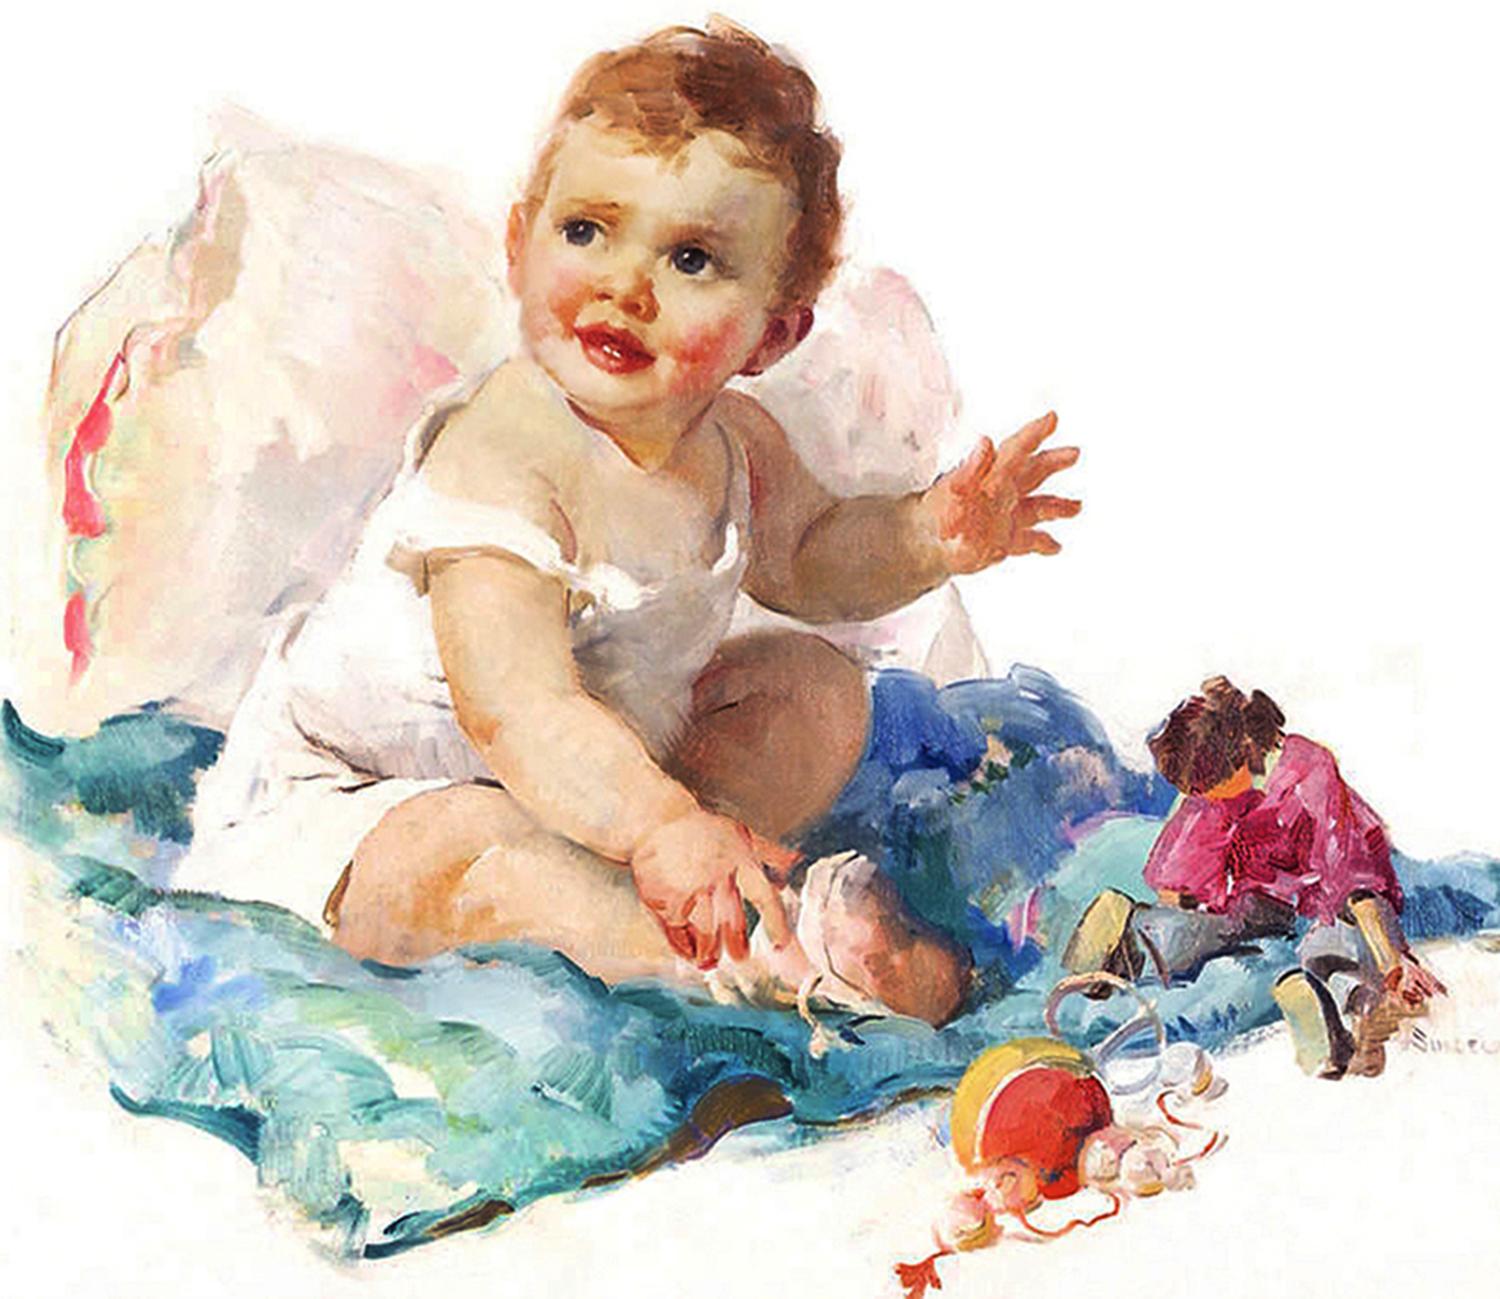 Cute Baby with Rosy Cheeks playing with Toys  - Painting by Haddon Hubbard Sundblom